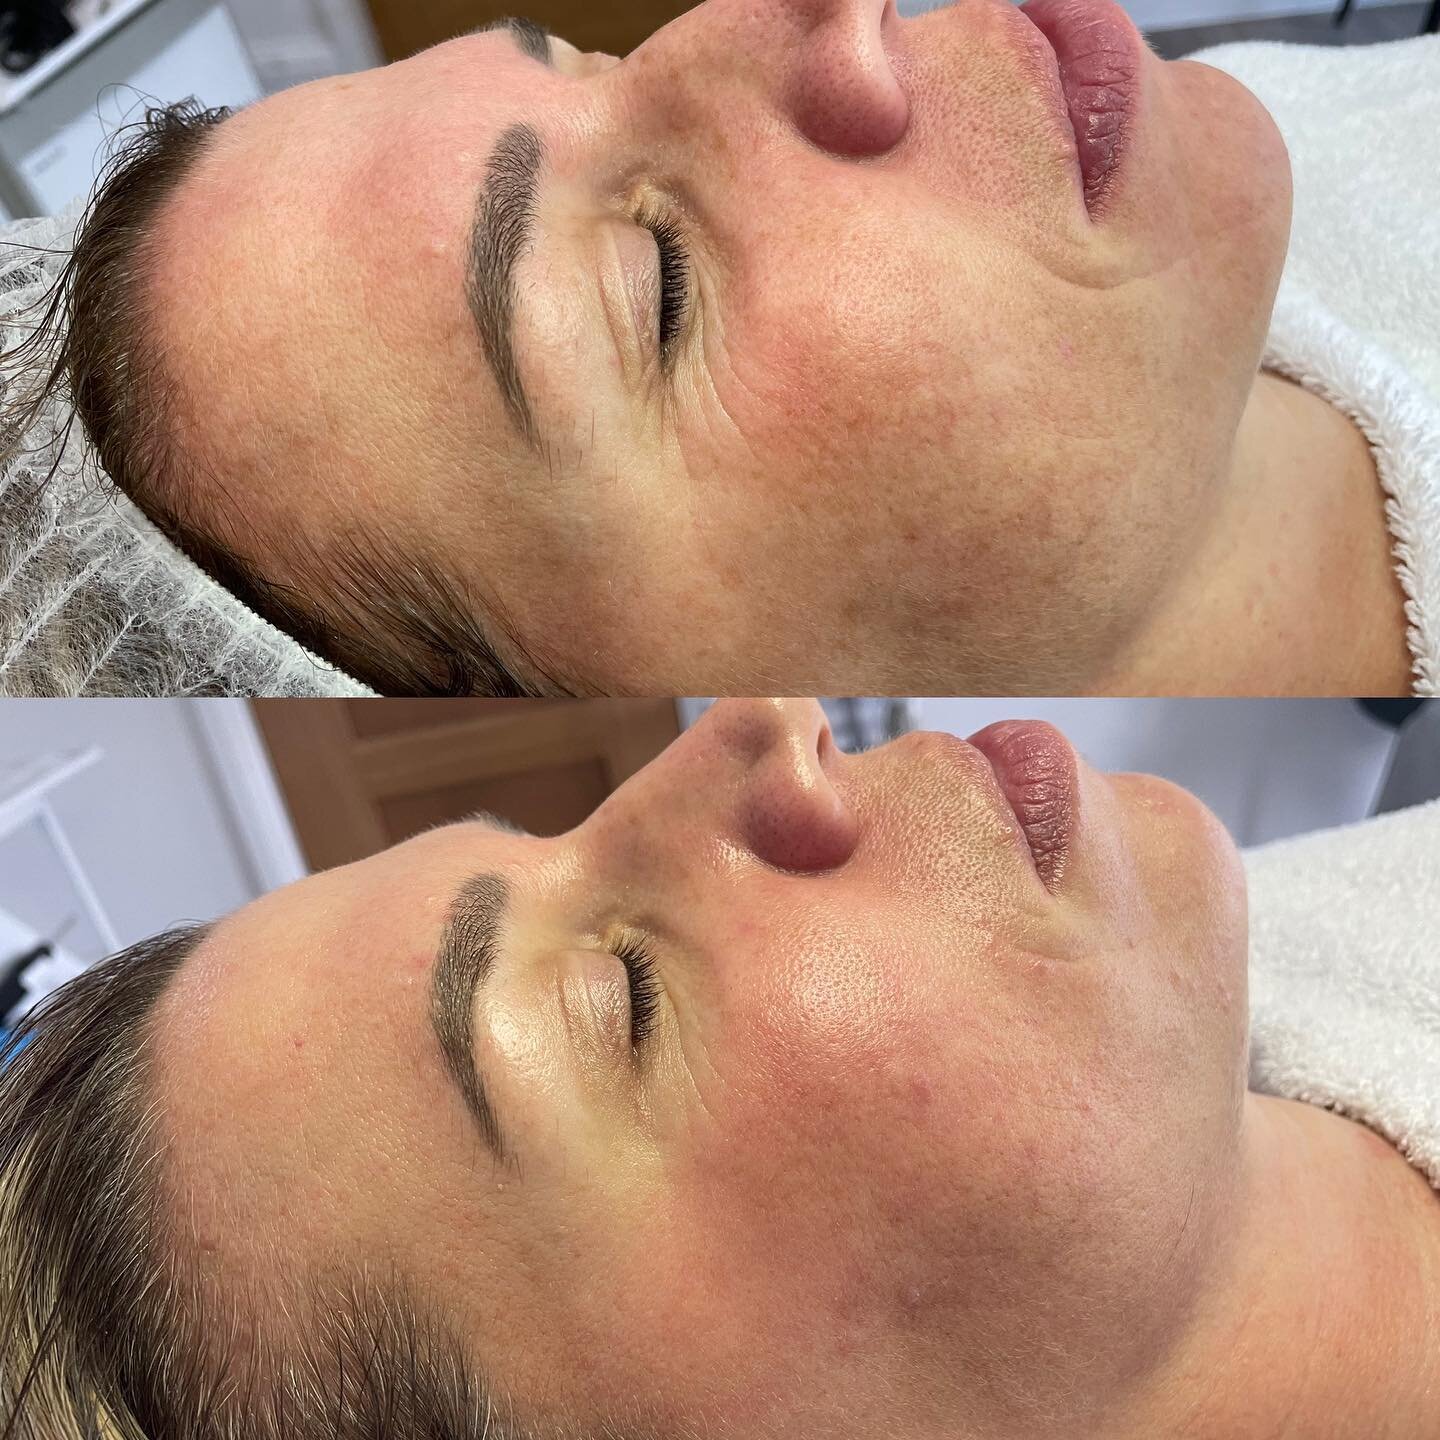 My clients Results after Vitamin C Resurfacer &amp; Nanoneedling treatment ✨

Overall improvement in skin tone, sun-damage and lines around her eyes and nasolabial folds have significantly improved. 

Clients results are only going to improve with re